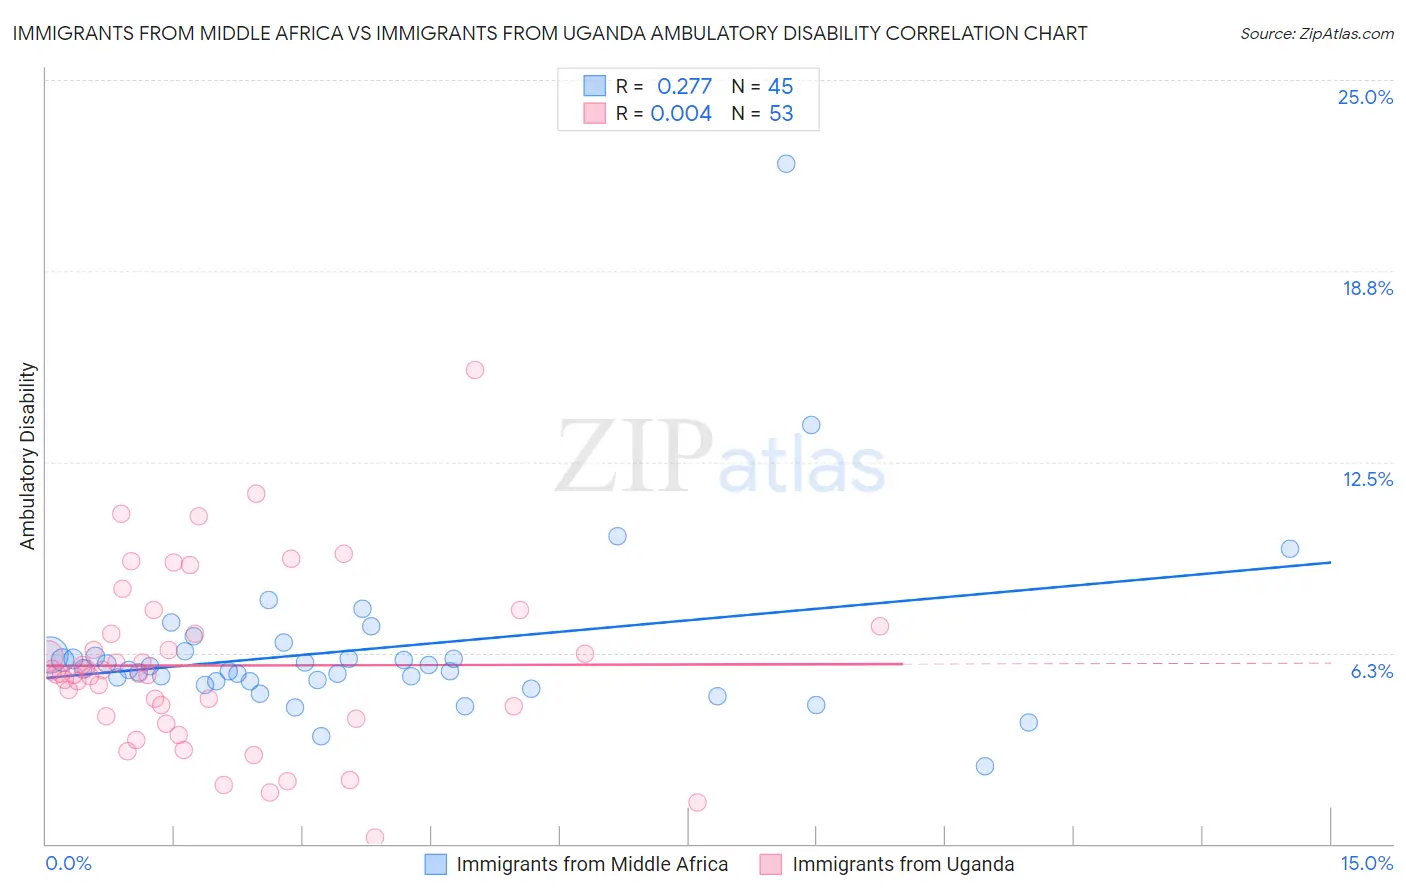 Immigrants from Middle Africa vs Immigrants from Uganda Ambulatory Disability